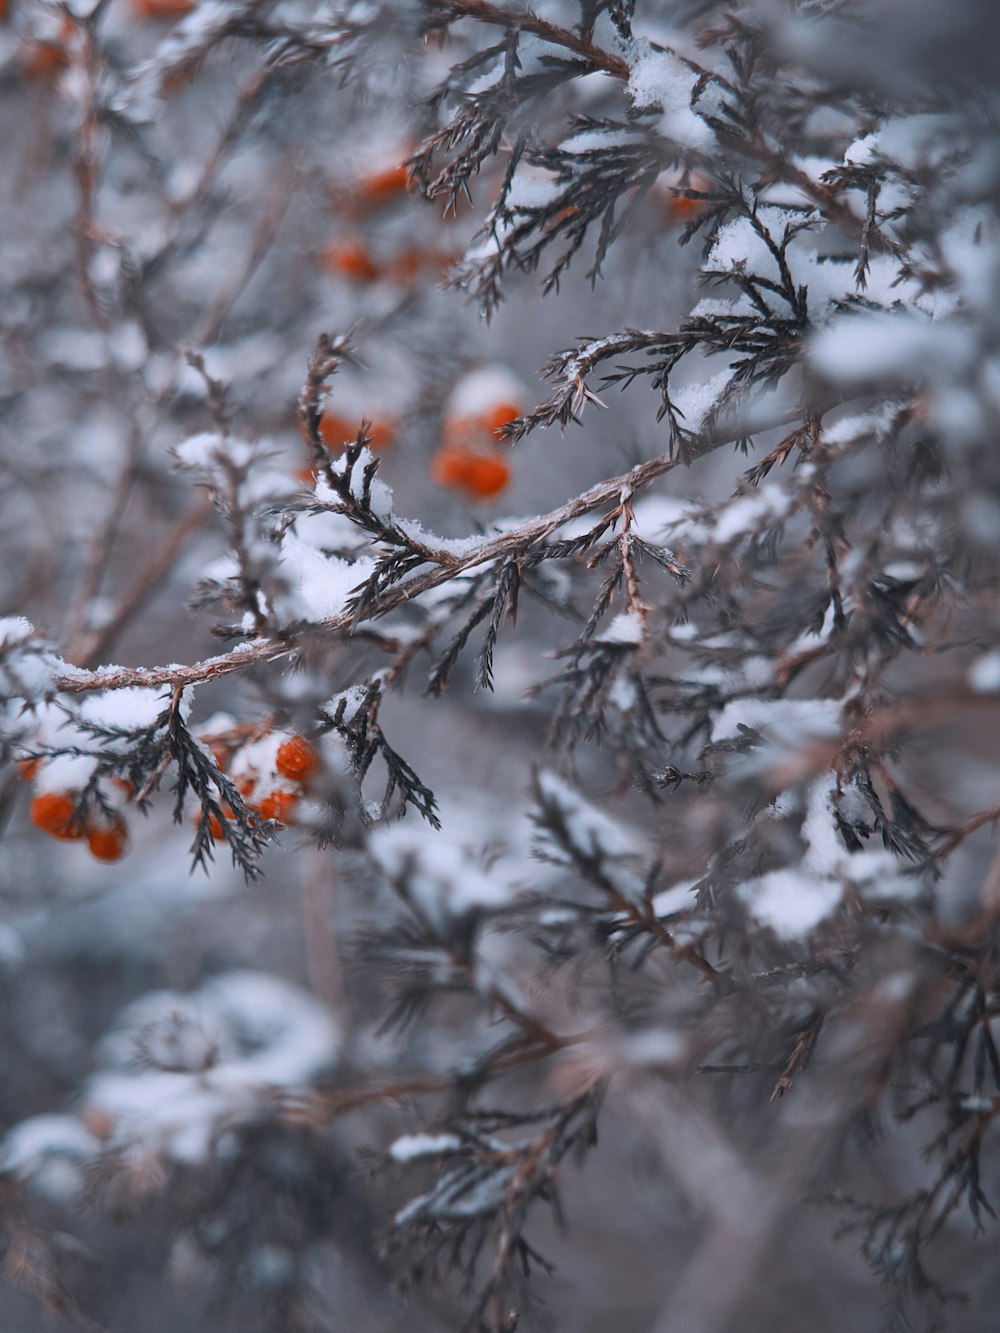 a tree with orange berries on it in the snow